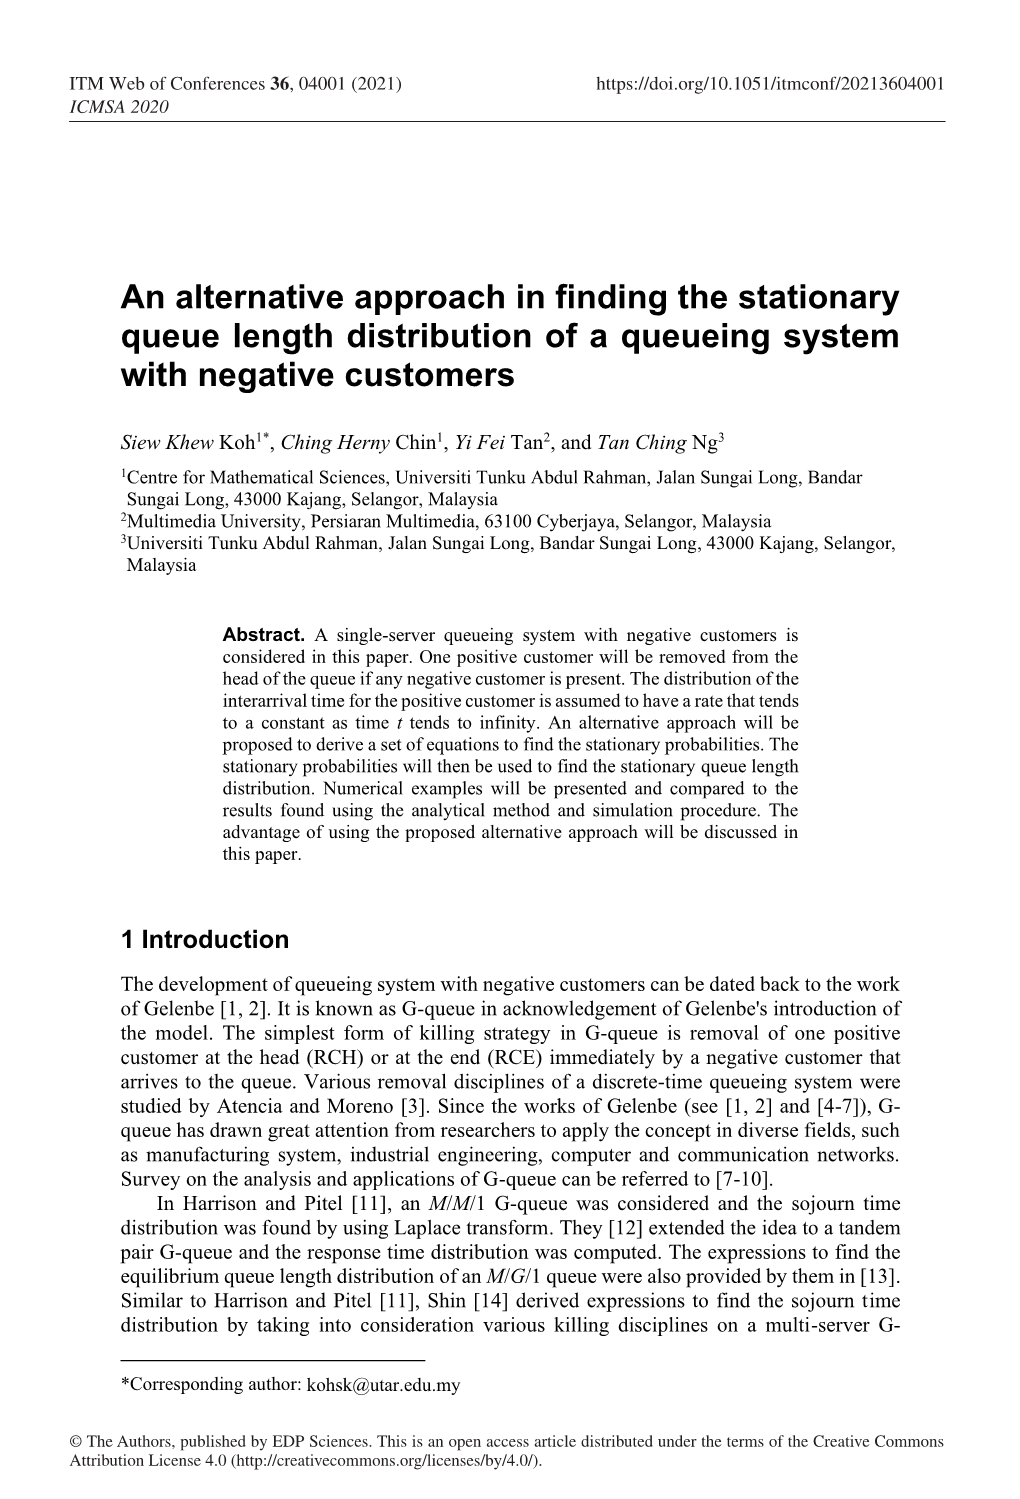 An Alternative Approach in Finding the Stationary Queue Length Distribution of a Queueing System with Negative Customers